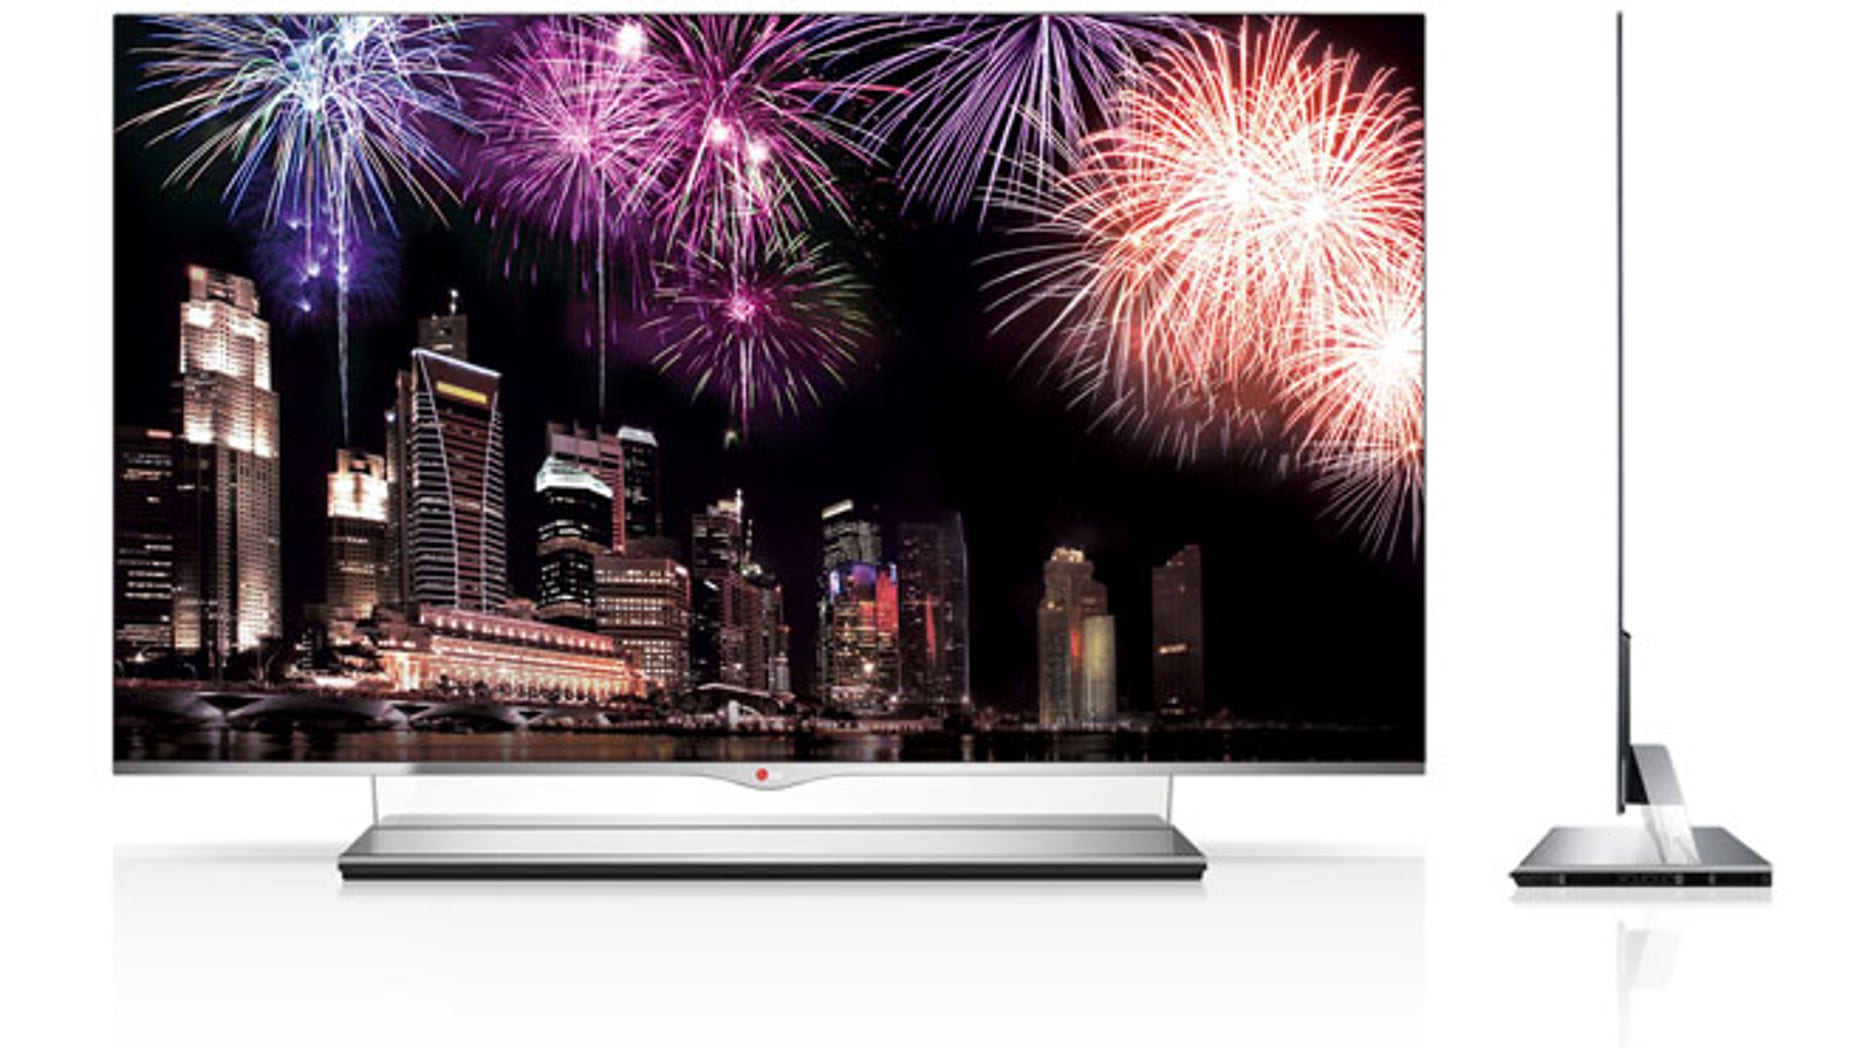 LG unveils world's first big-screen OLED HDTV